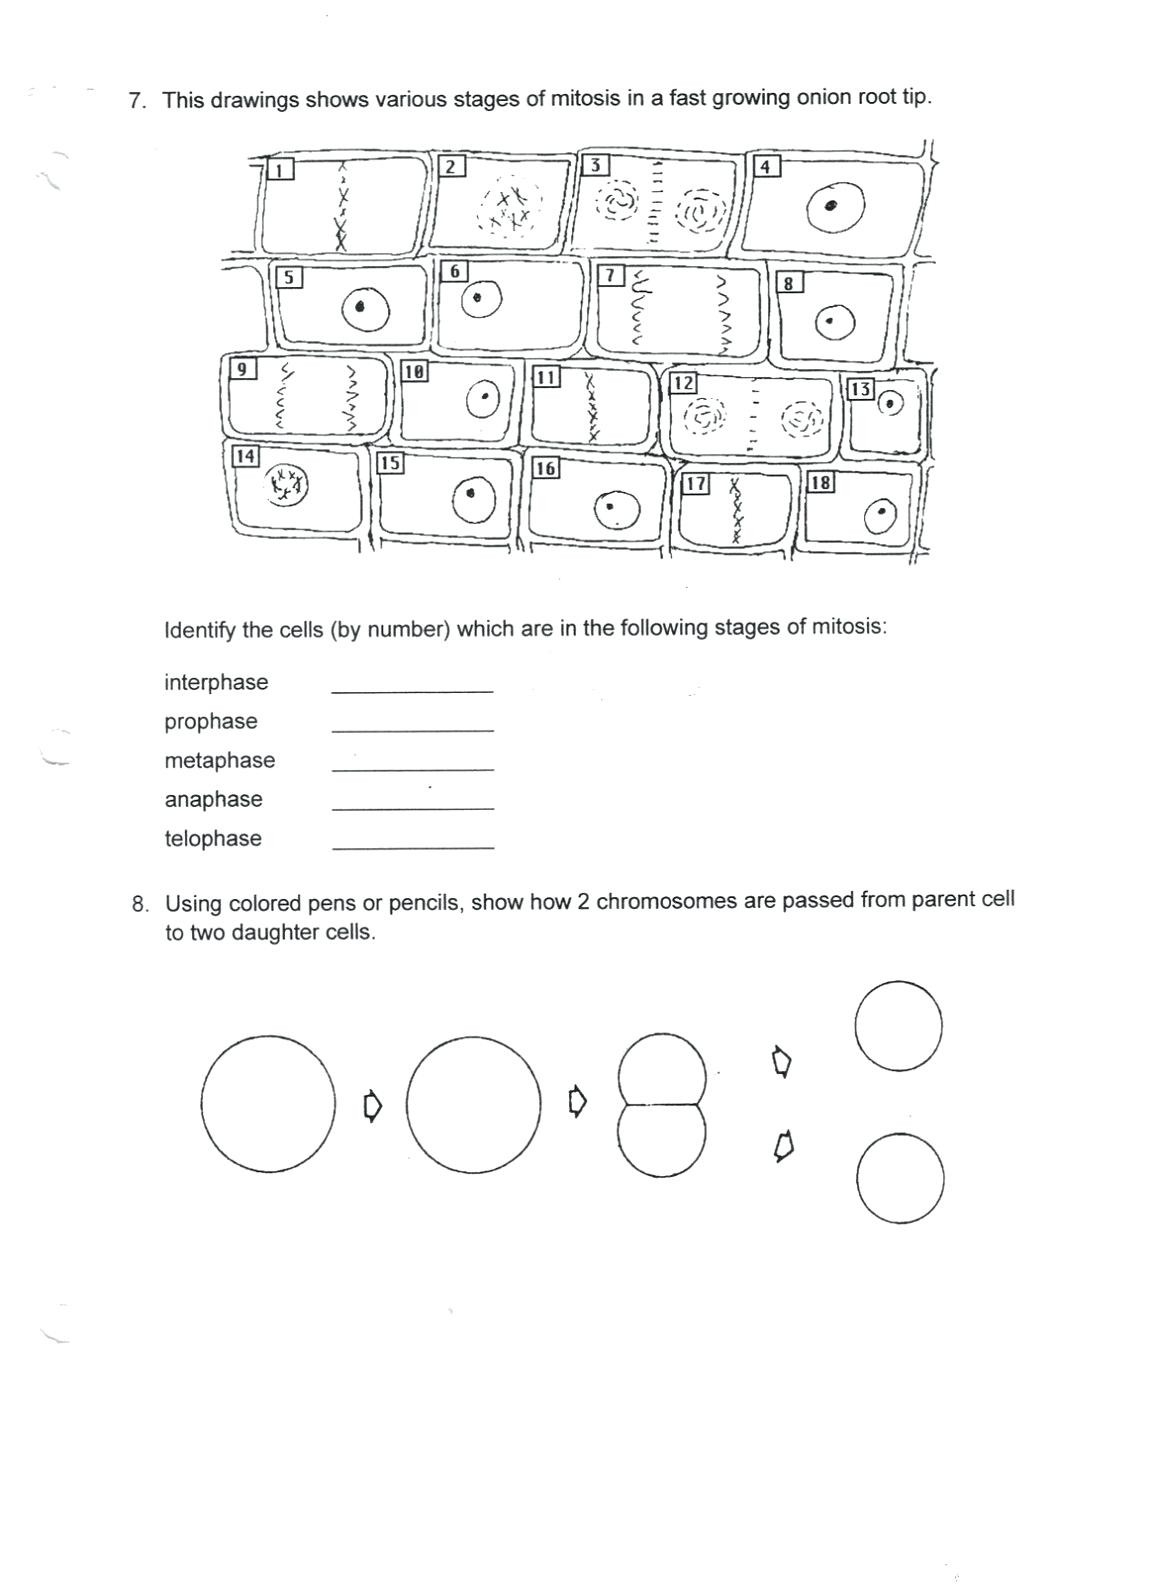 Cell Cycle Student Worksheet Answer Key Mitosis Coloring Answer Key Biology Corner My Pdf The Liagrafi Belots Showsslt Cerrsit Order I Tehich Mirosis Occun And O Marulidamanikaso